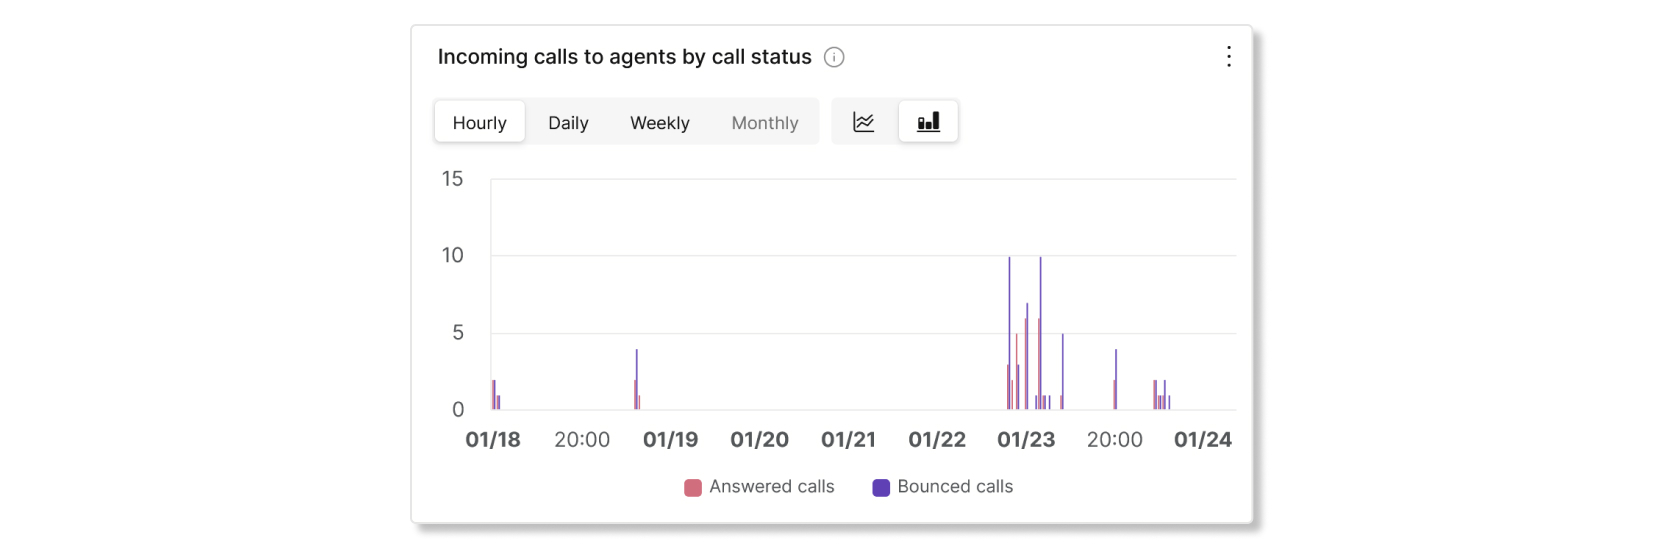 Incoming calls to agents by call status chart in call queue agent stats analytics